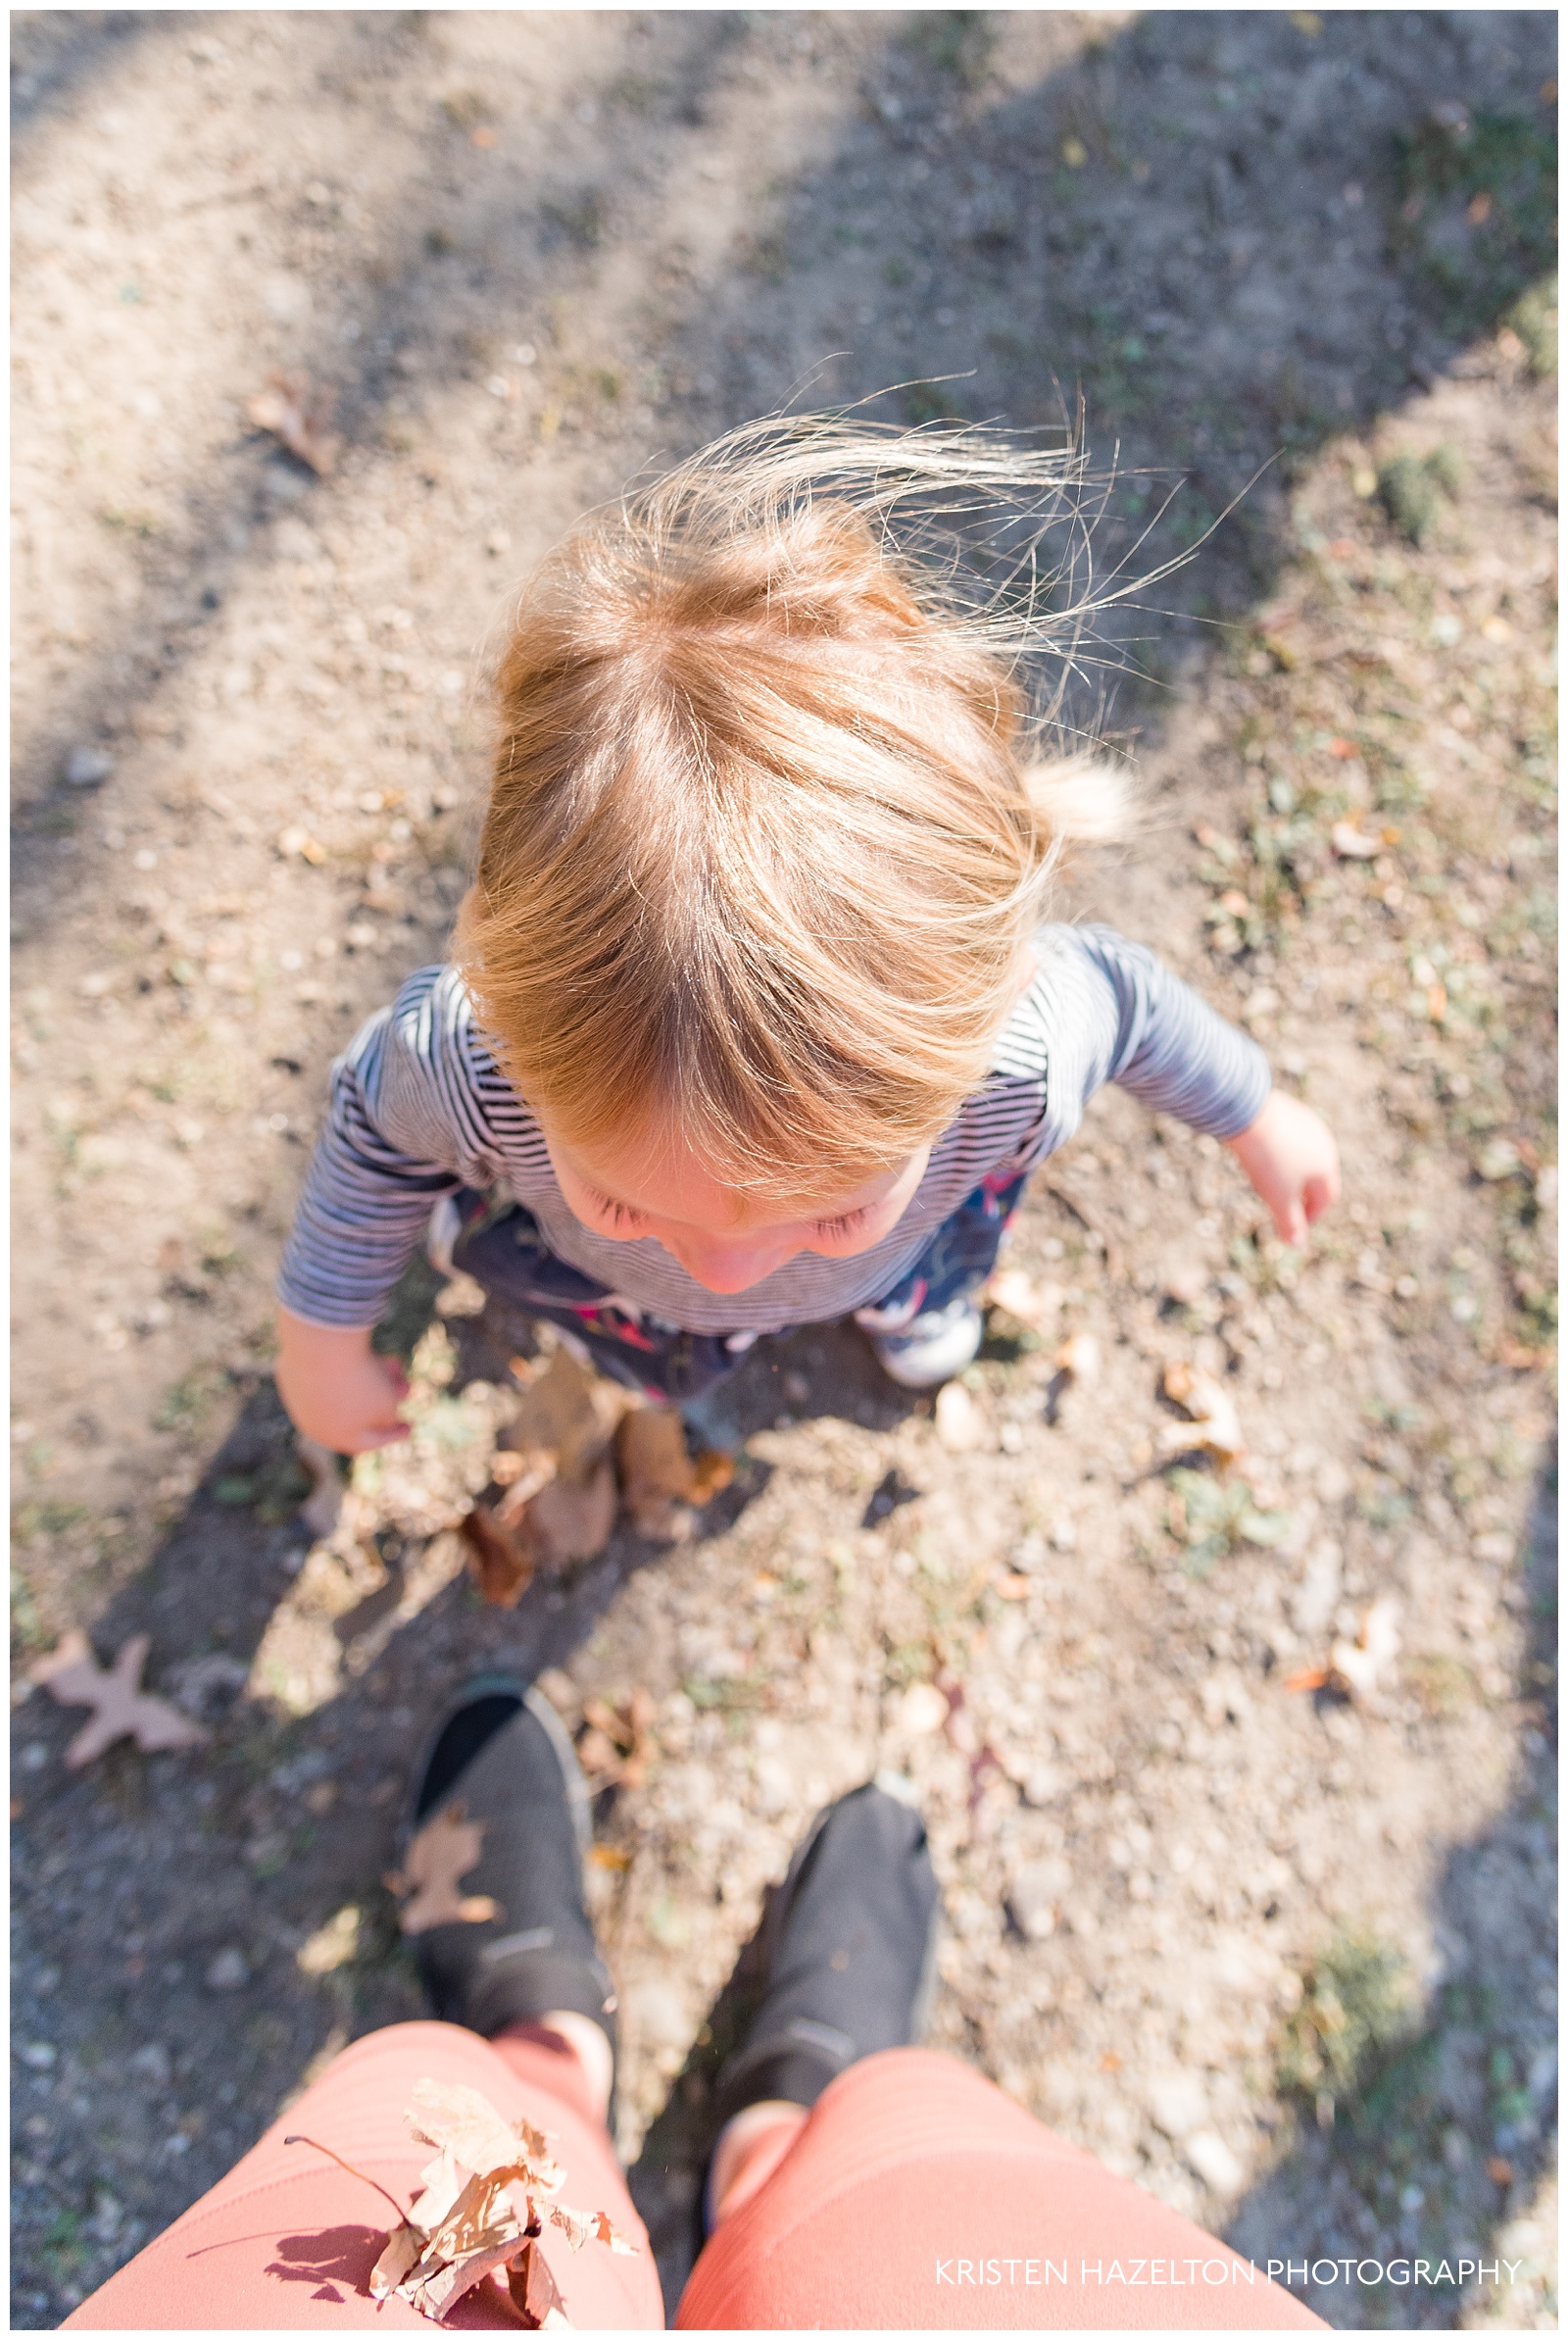 Toddler throwing leaves at the photographer